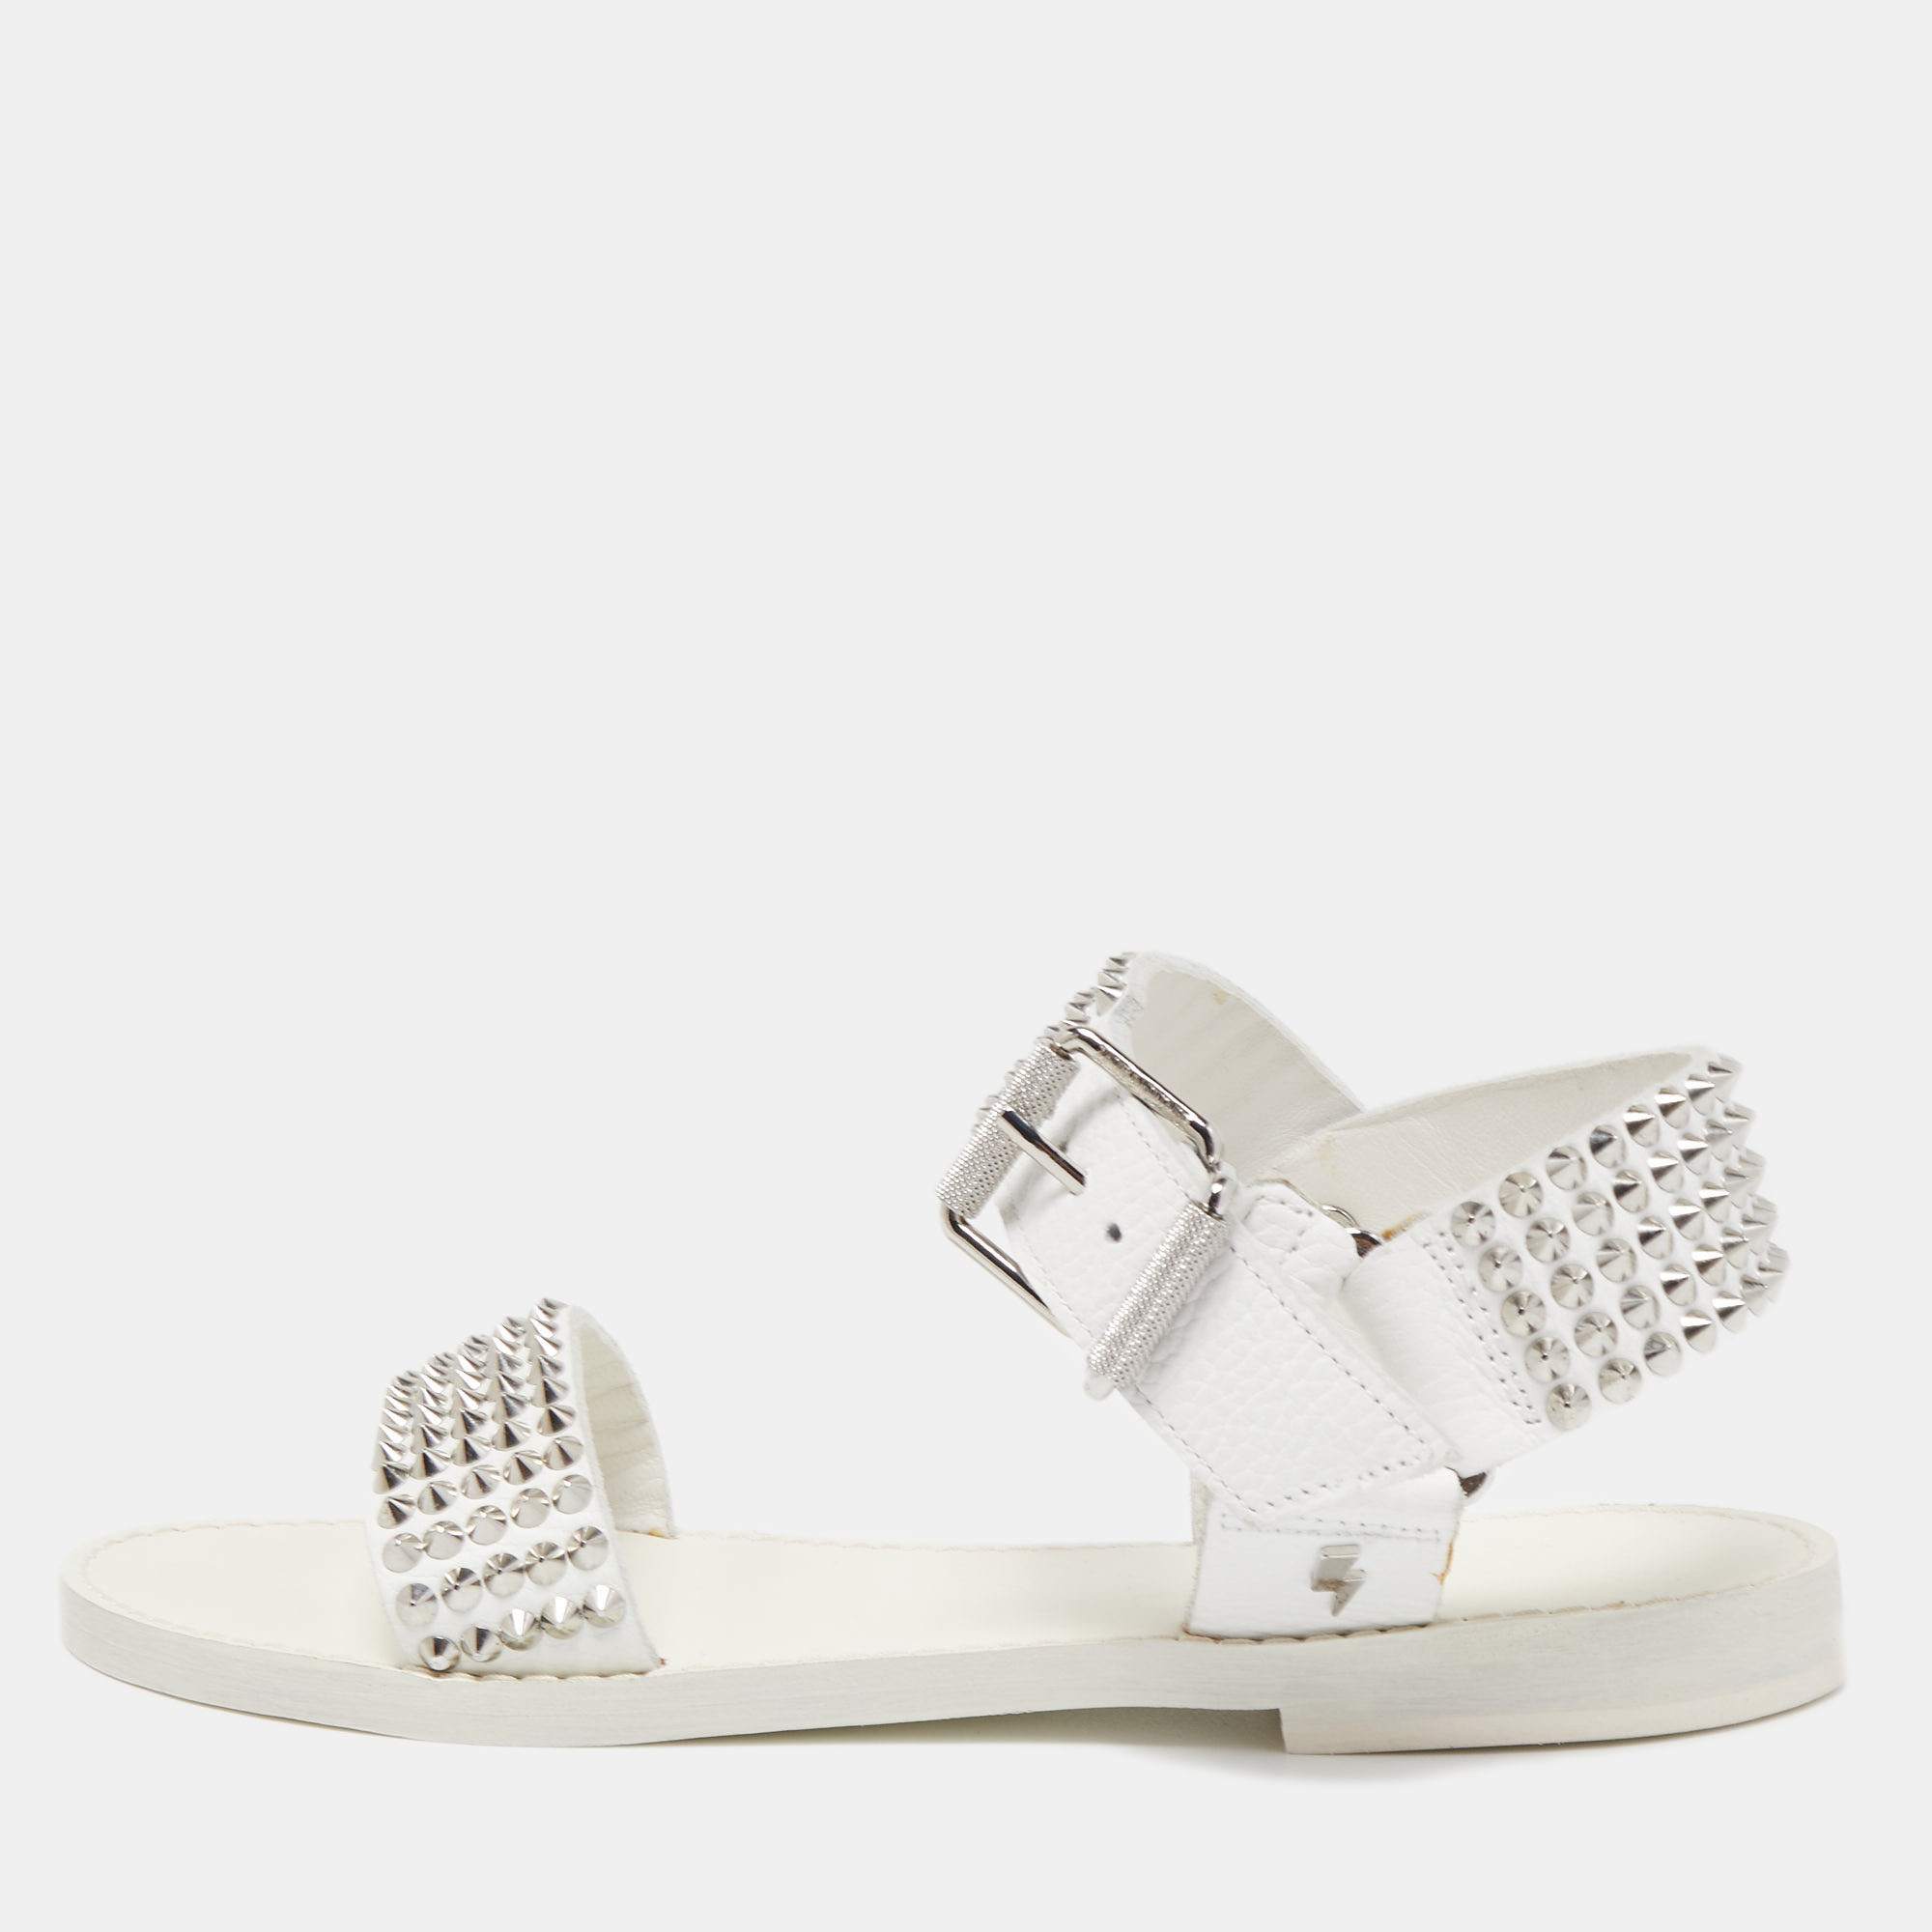 Zadig & voltaire white leather ankle strap spiked sandals size 36